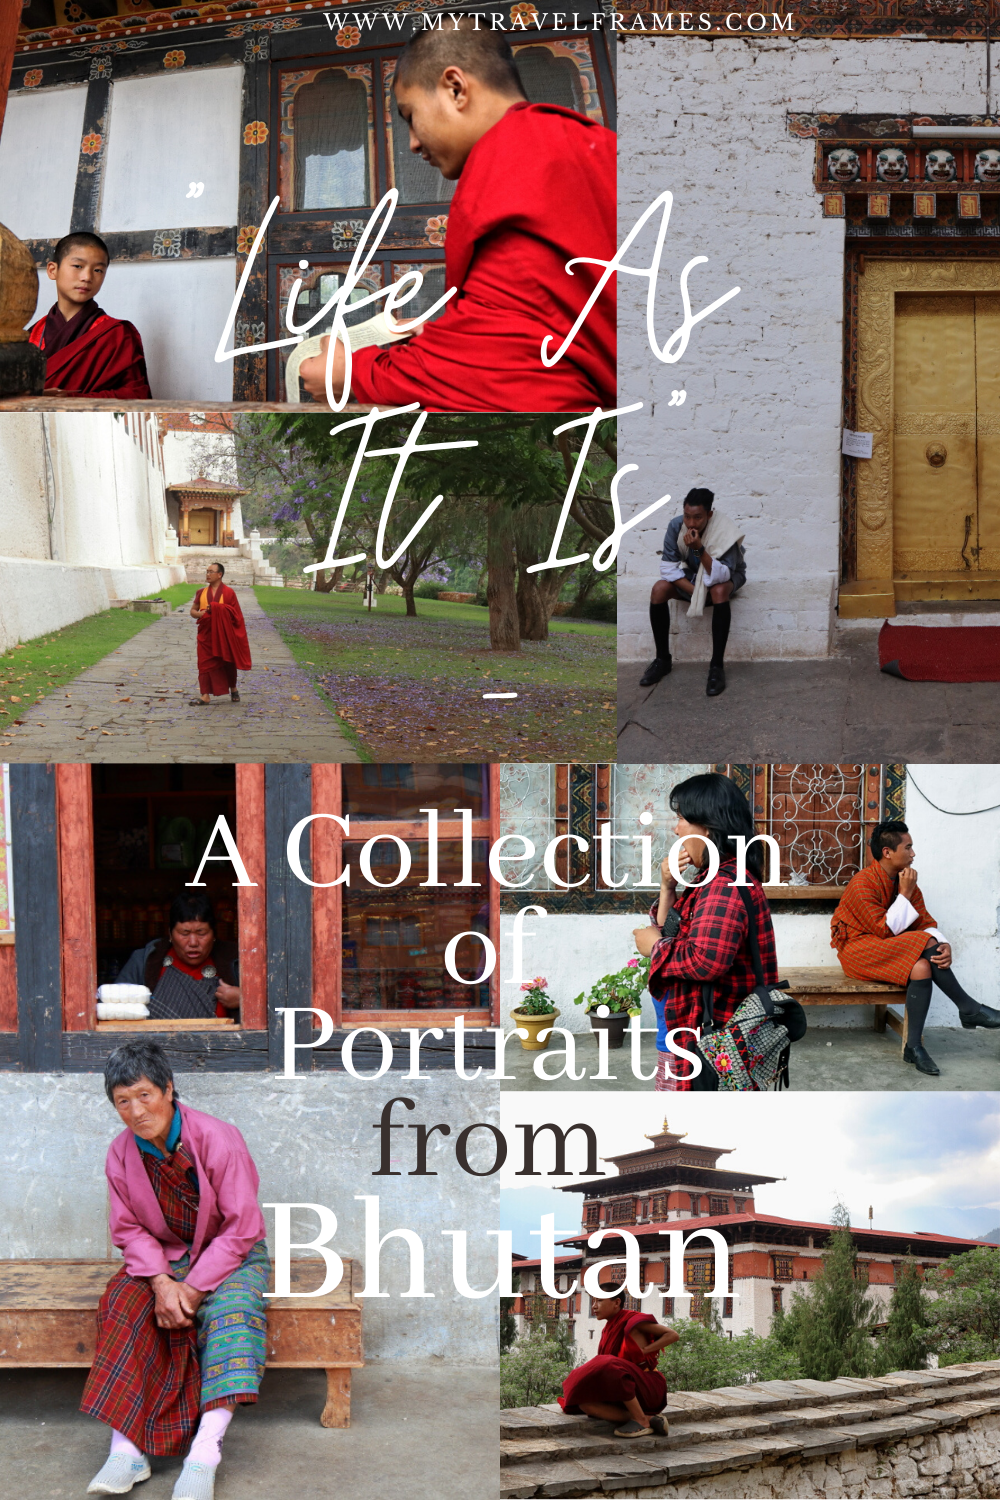 You are currently viewing “Life As It Is” – A Collection of Portraits from Bhutan